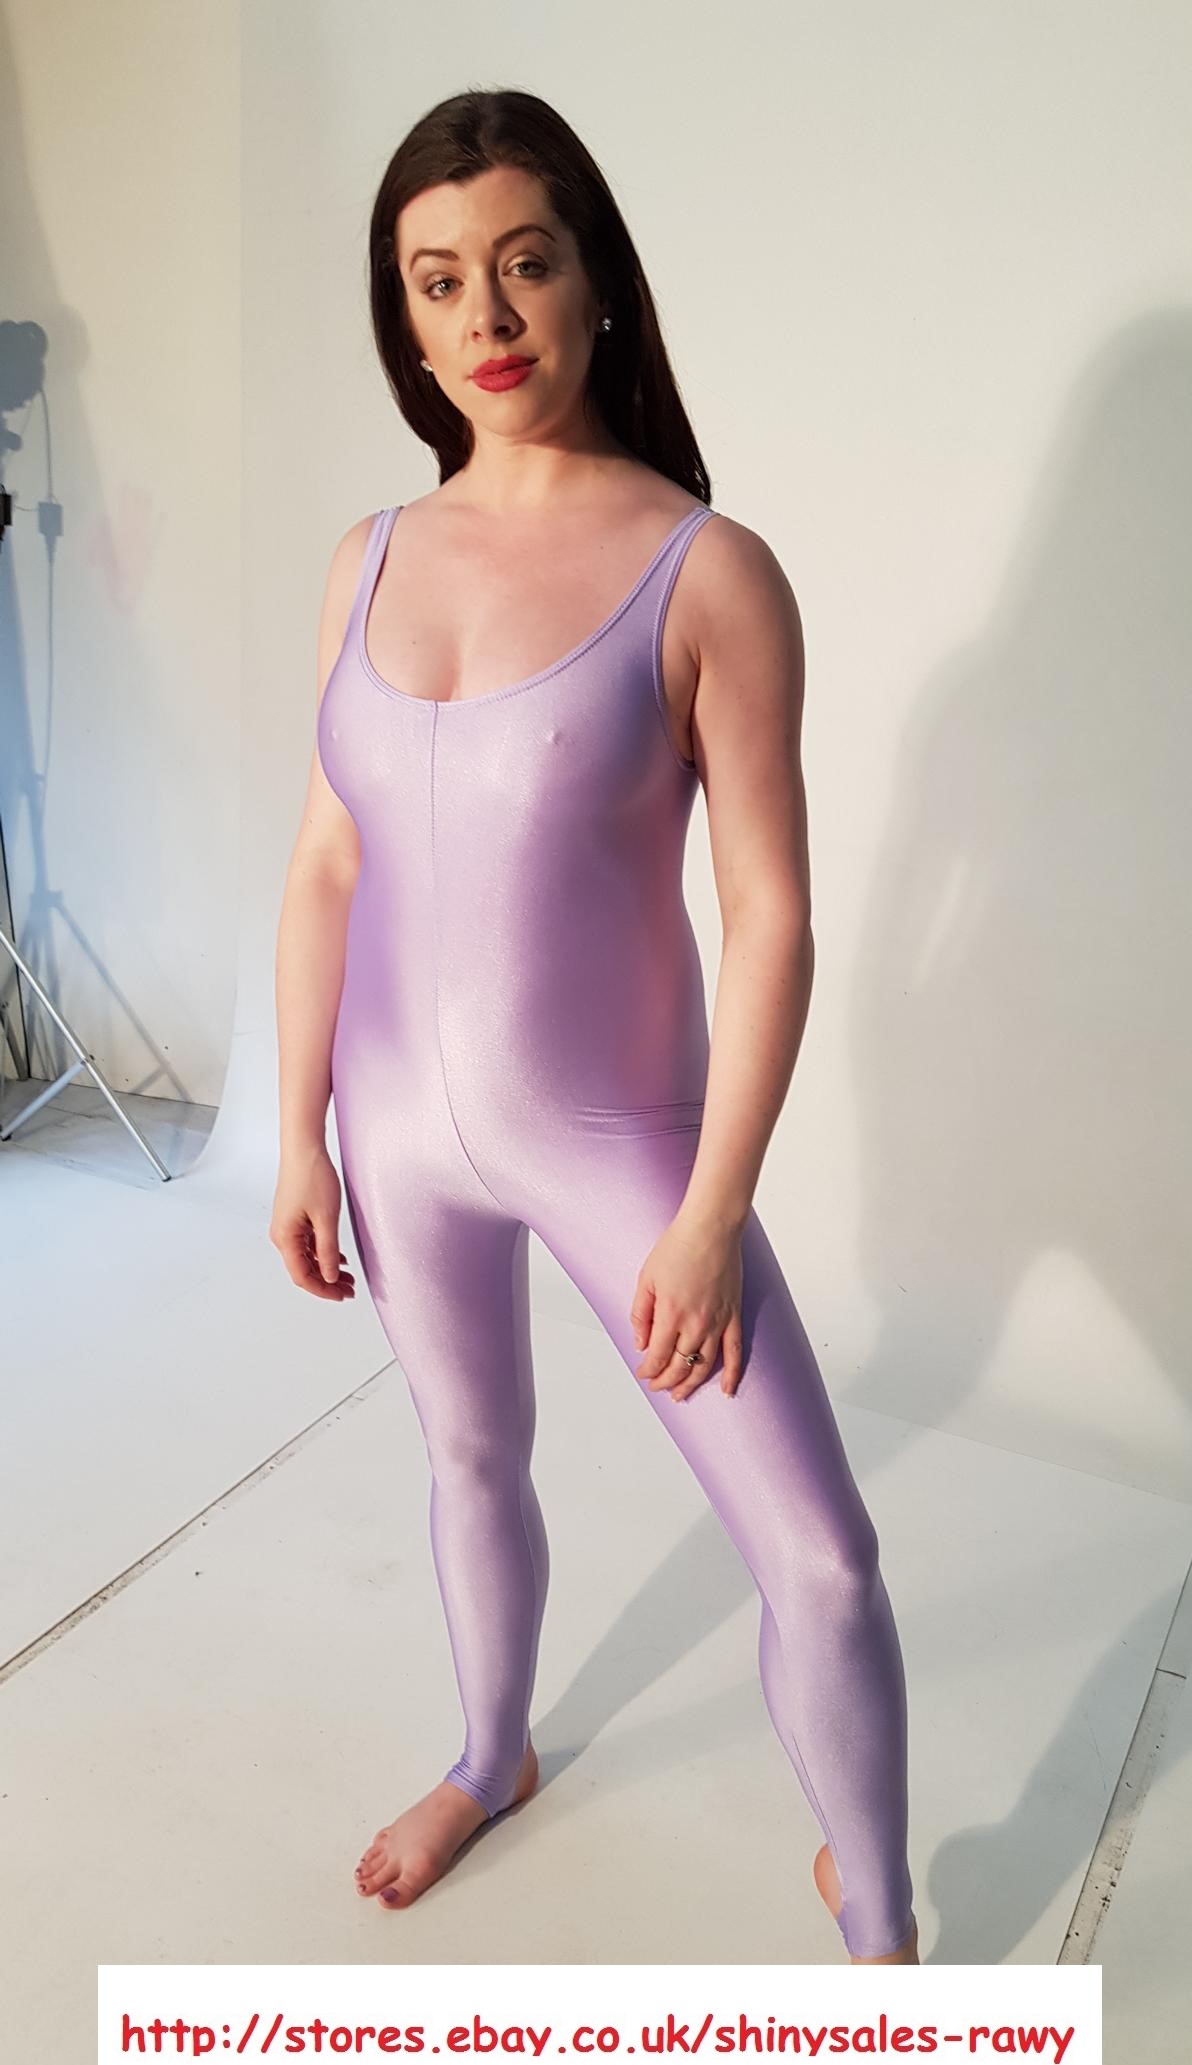 ShinySalesRawy on X: Lilac Shiny Spandex Catsuit added For Sale